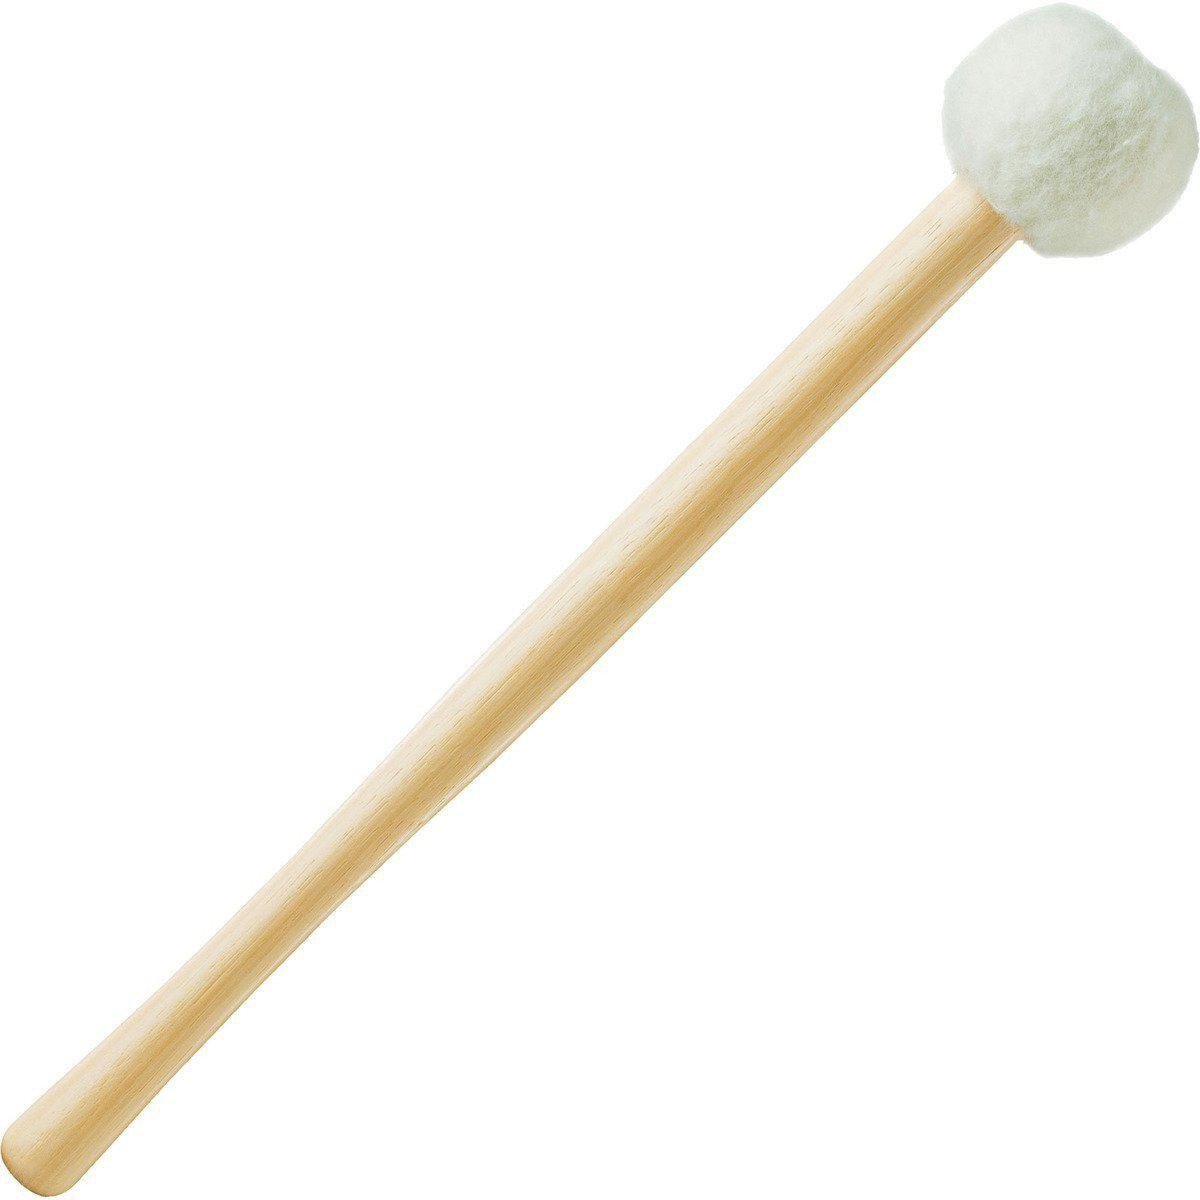  ProMark Bass Drum Mallets - Performer Series - Special